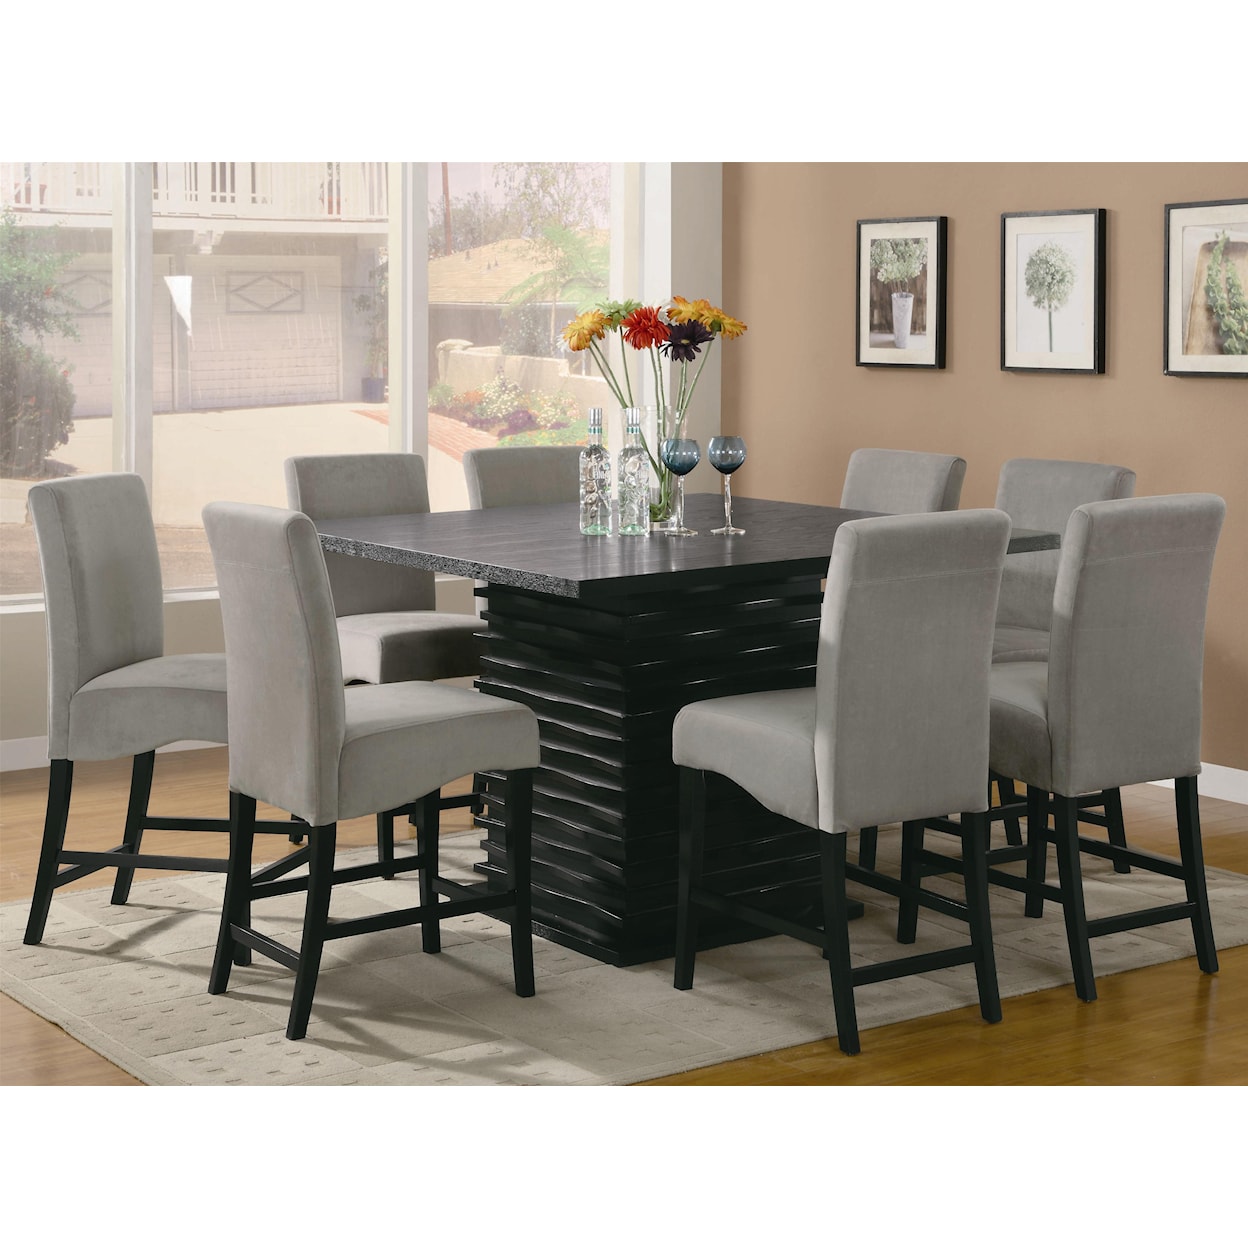 Coaster Stanton  9pc Dining Room Group